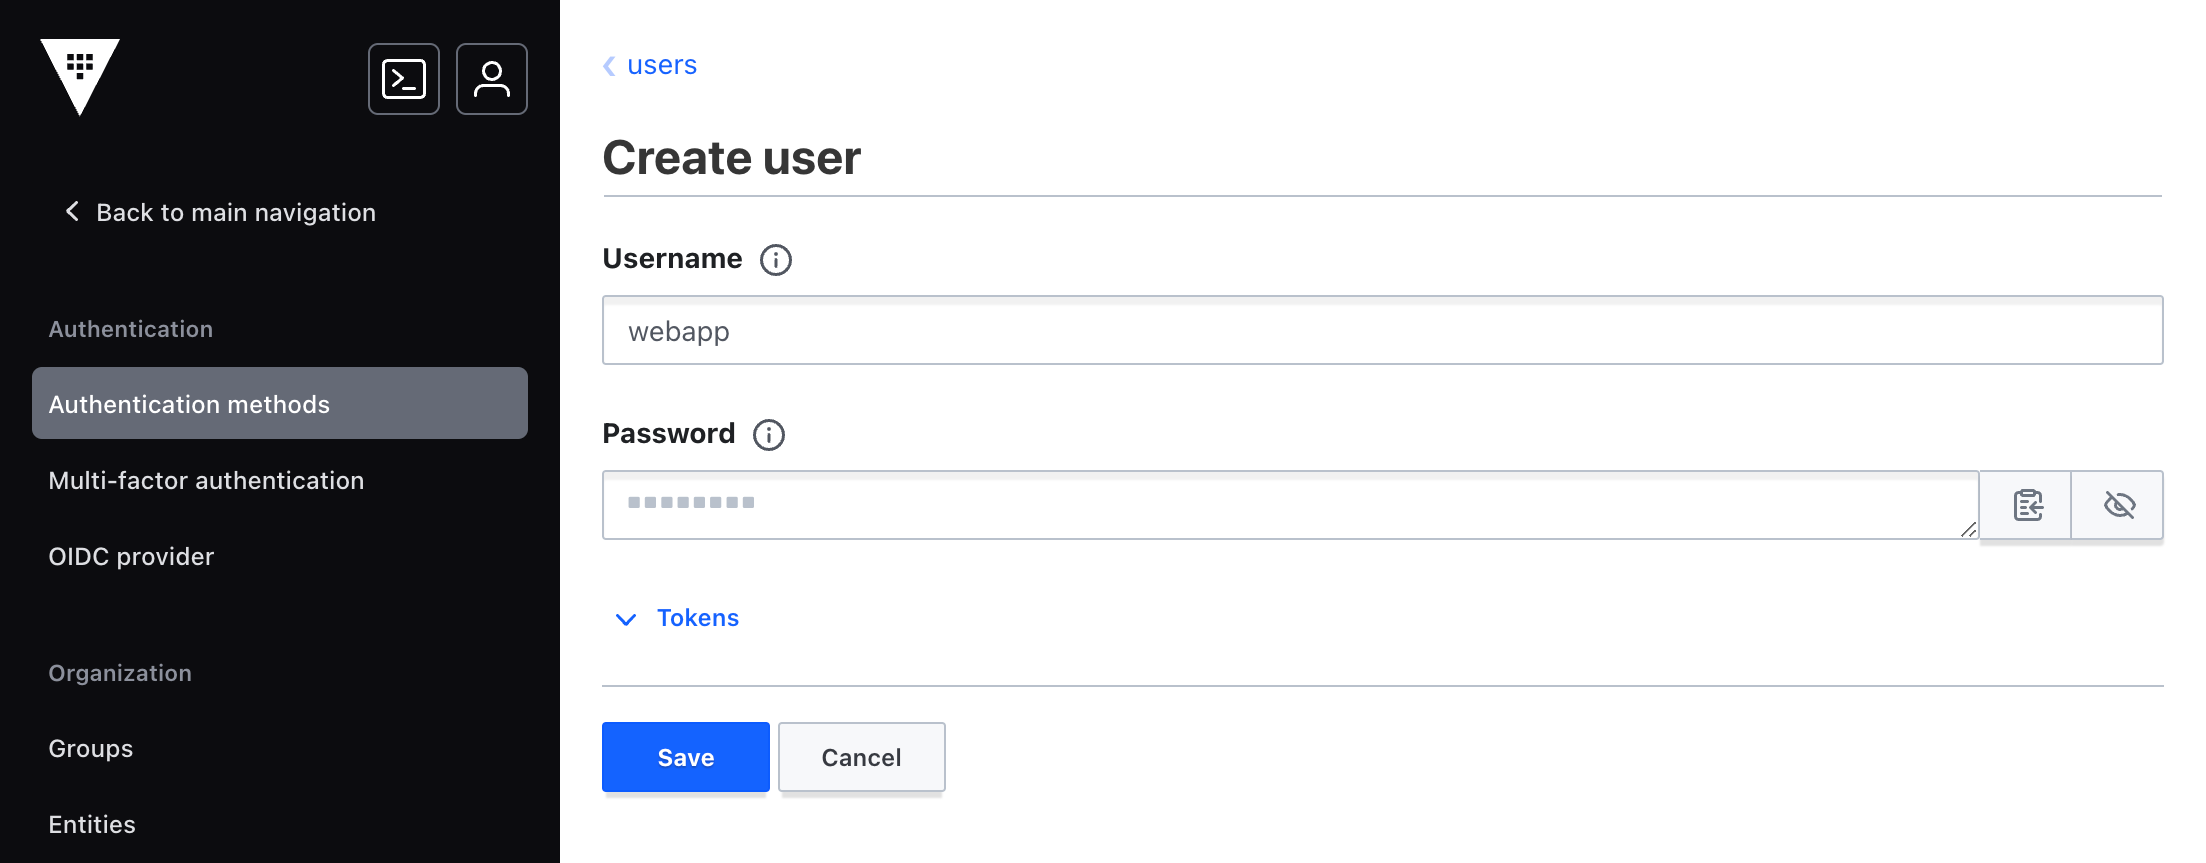 create username and password
populated